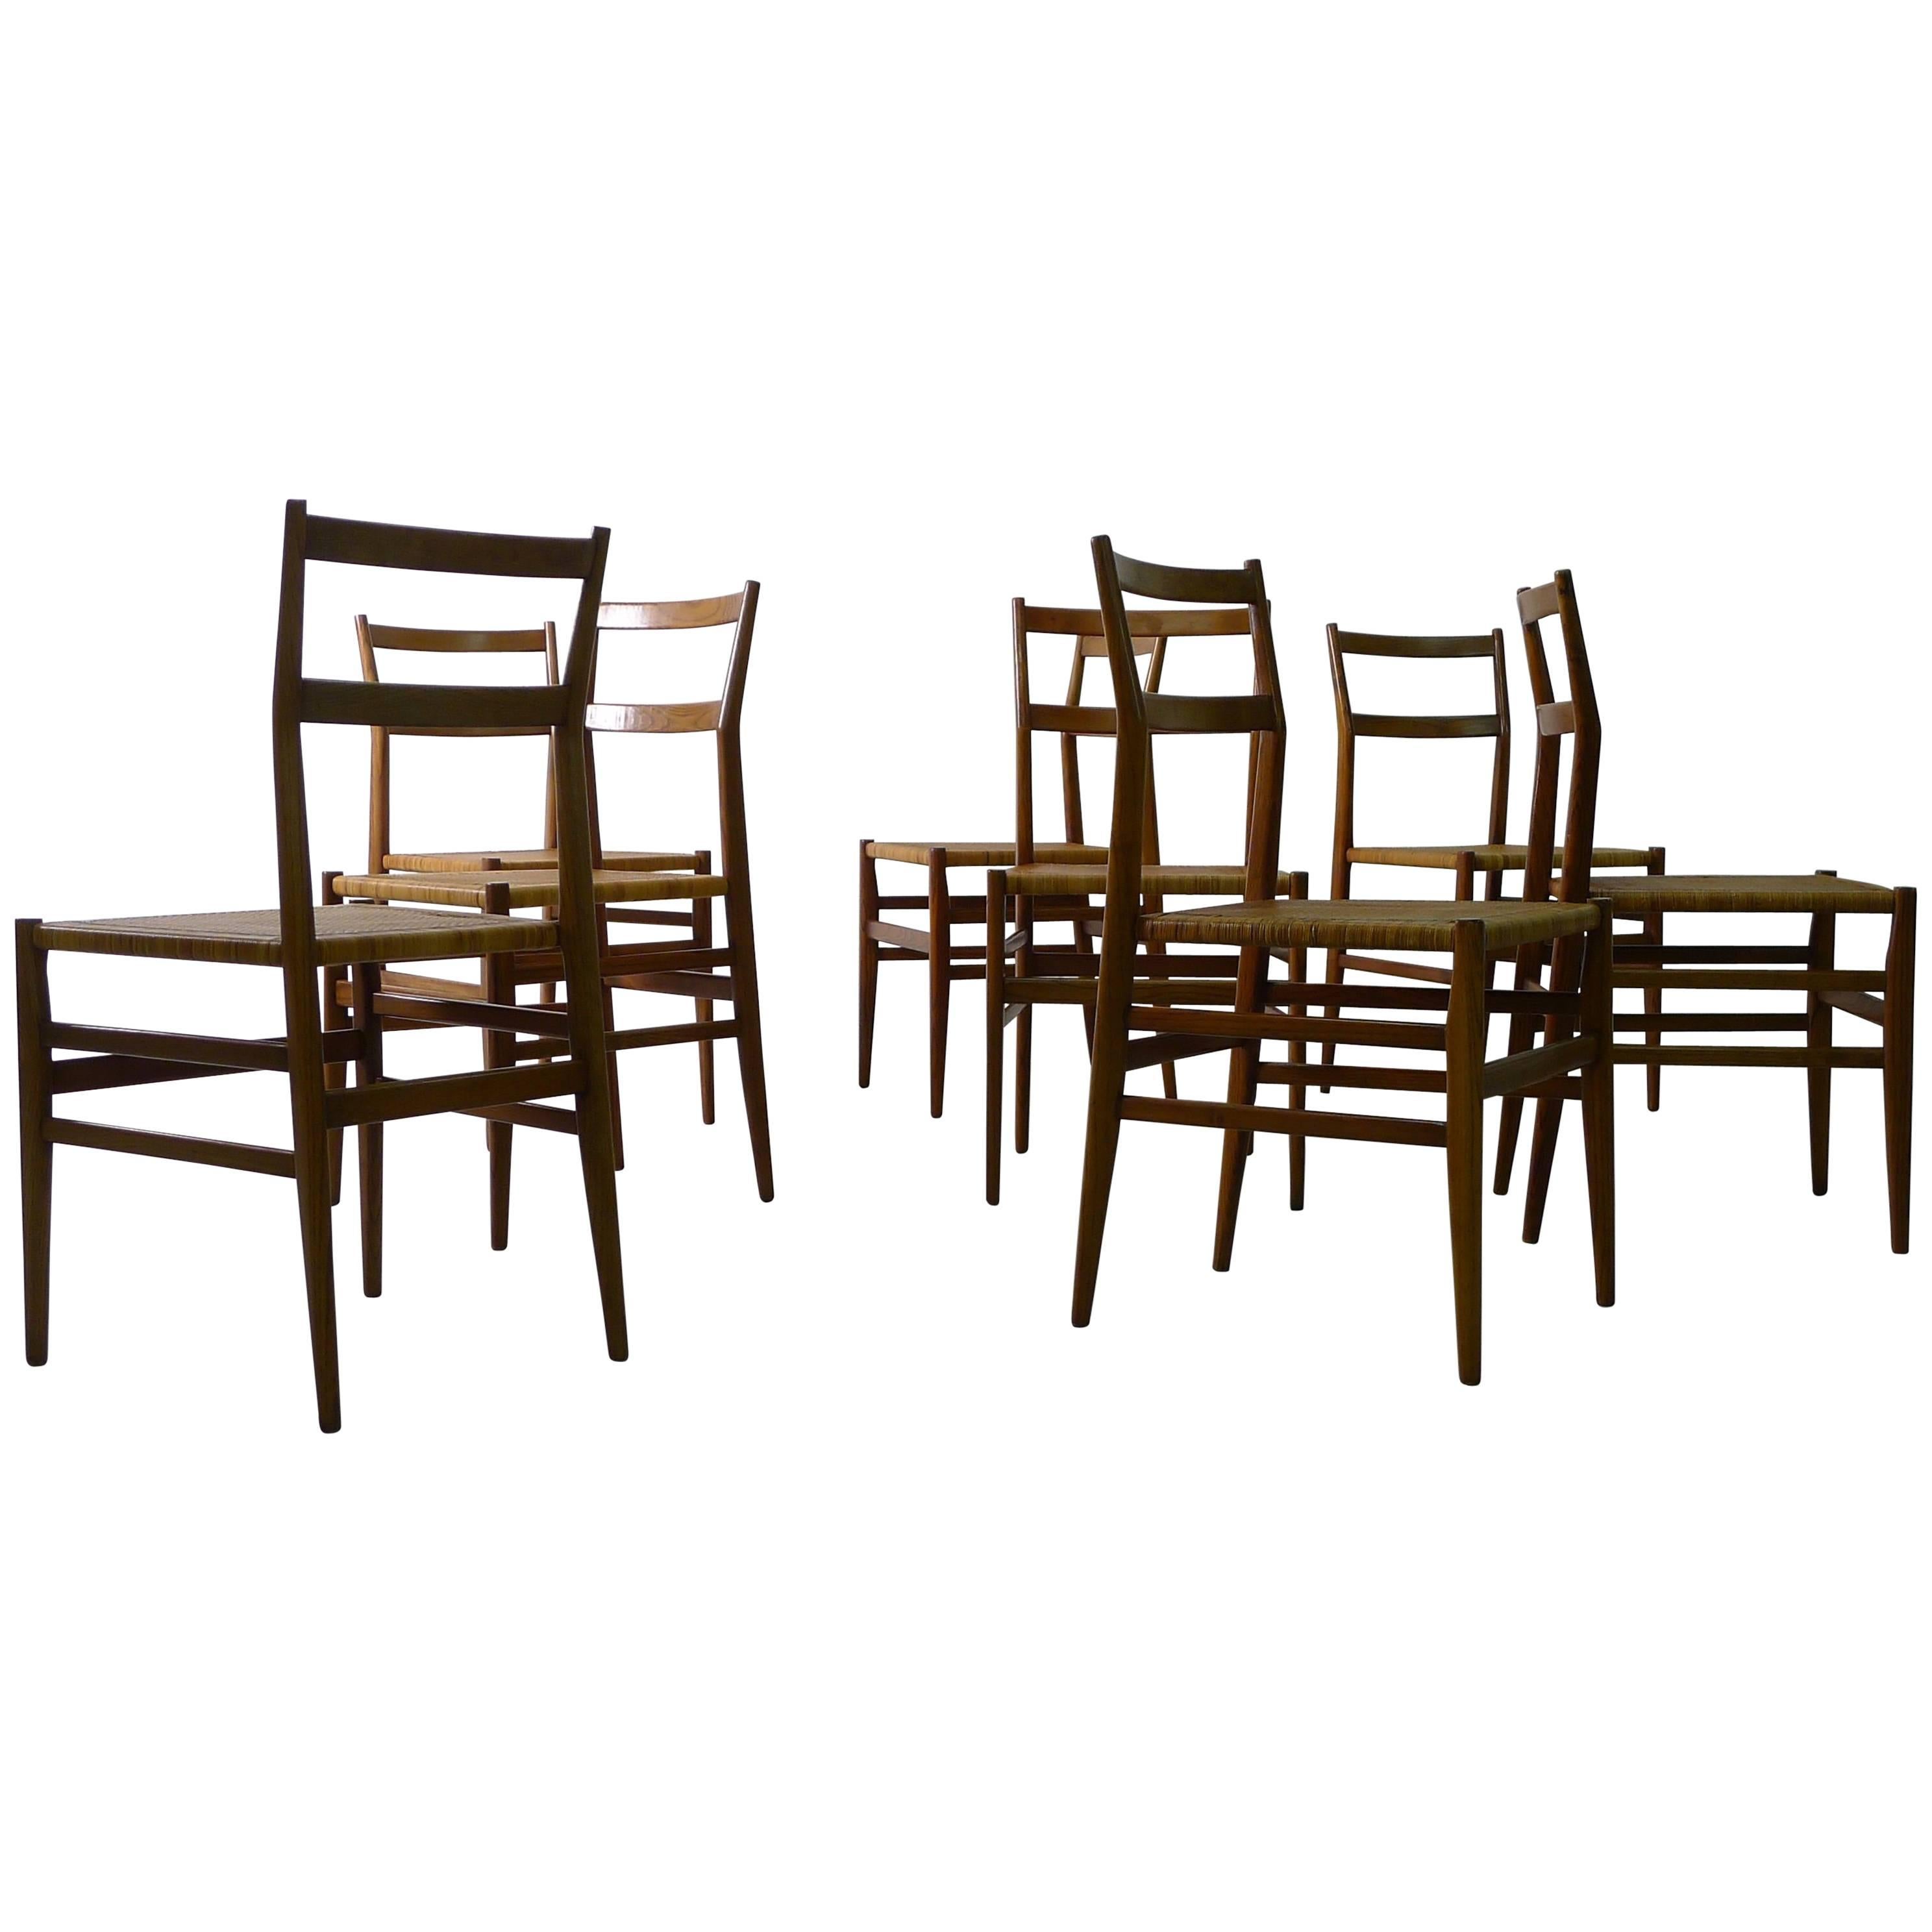 Gio Ponti for Cassina, Italy, Set of Eight Leggera Chairs, 1950s, Labelled